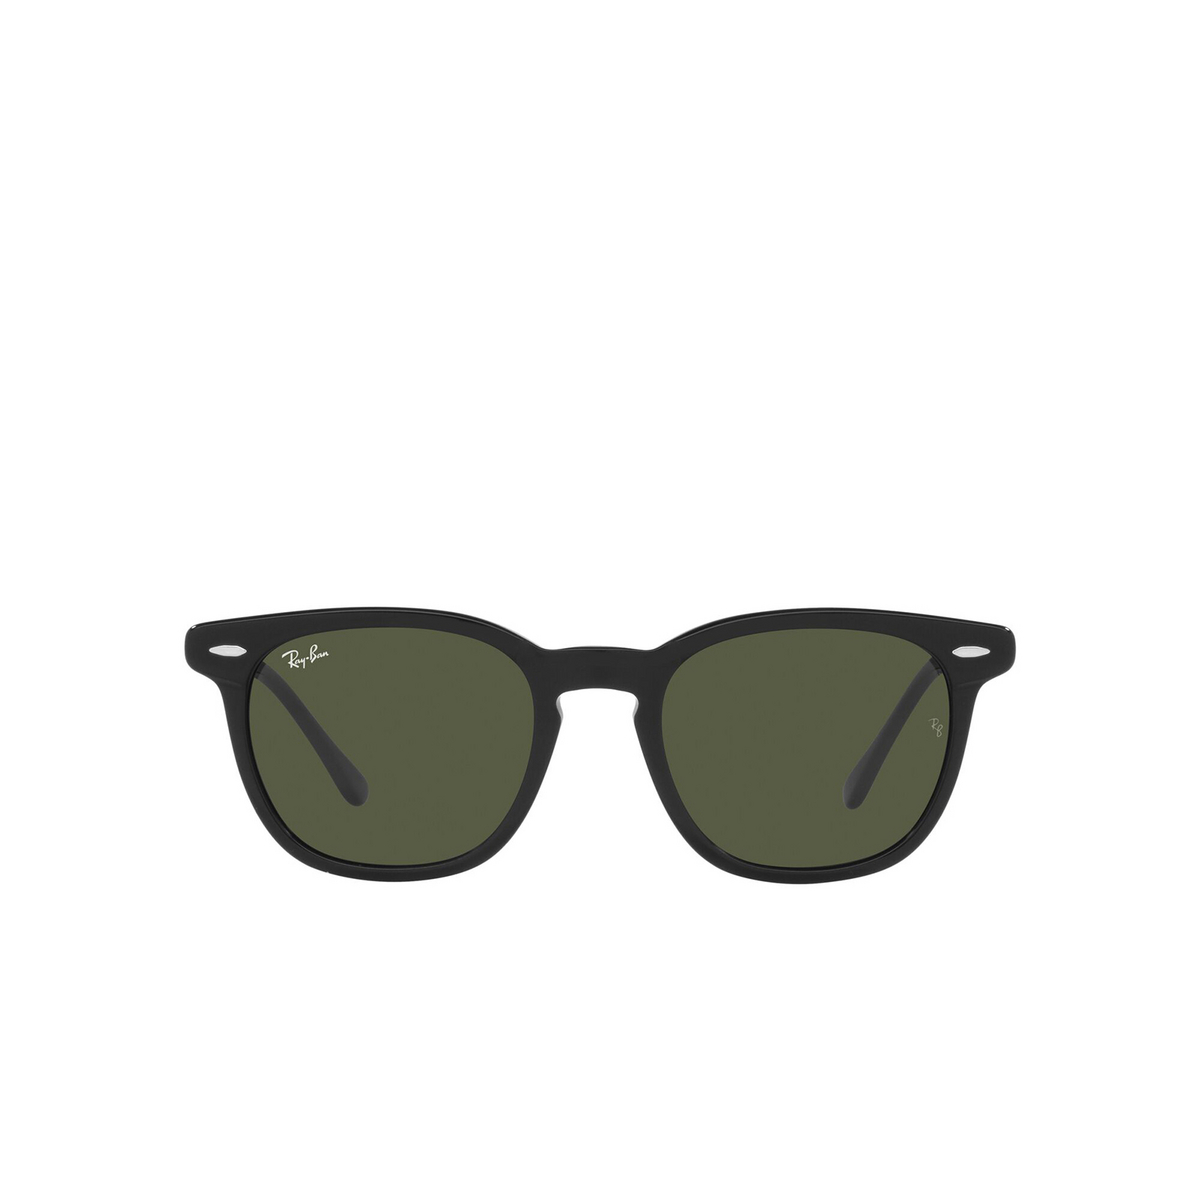 Ray-Ban® Square Sunglasses: Hawkeye RB2298 color Black 901/31 - front view.